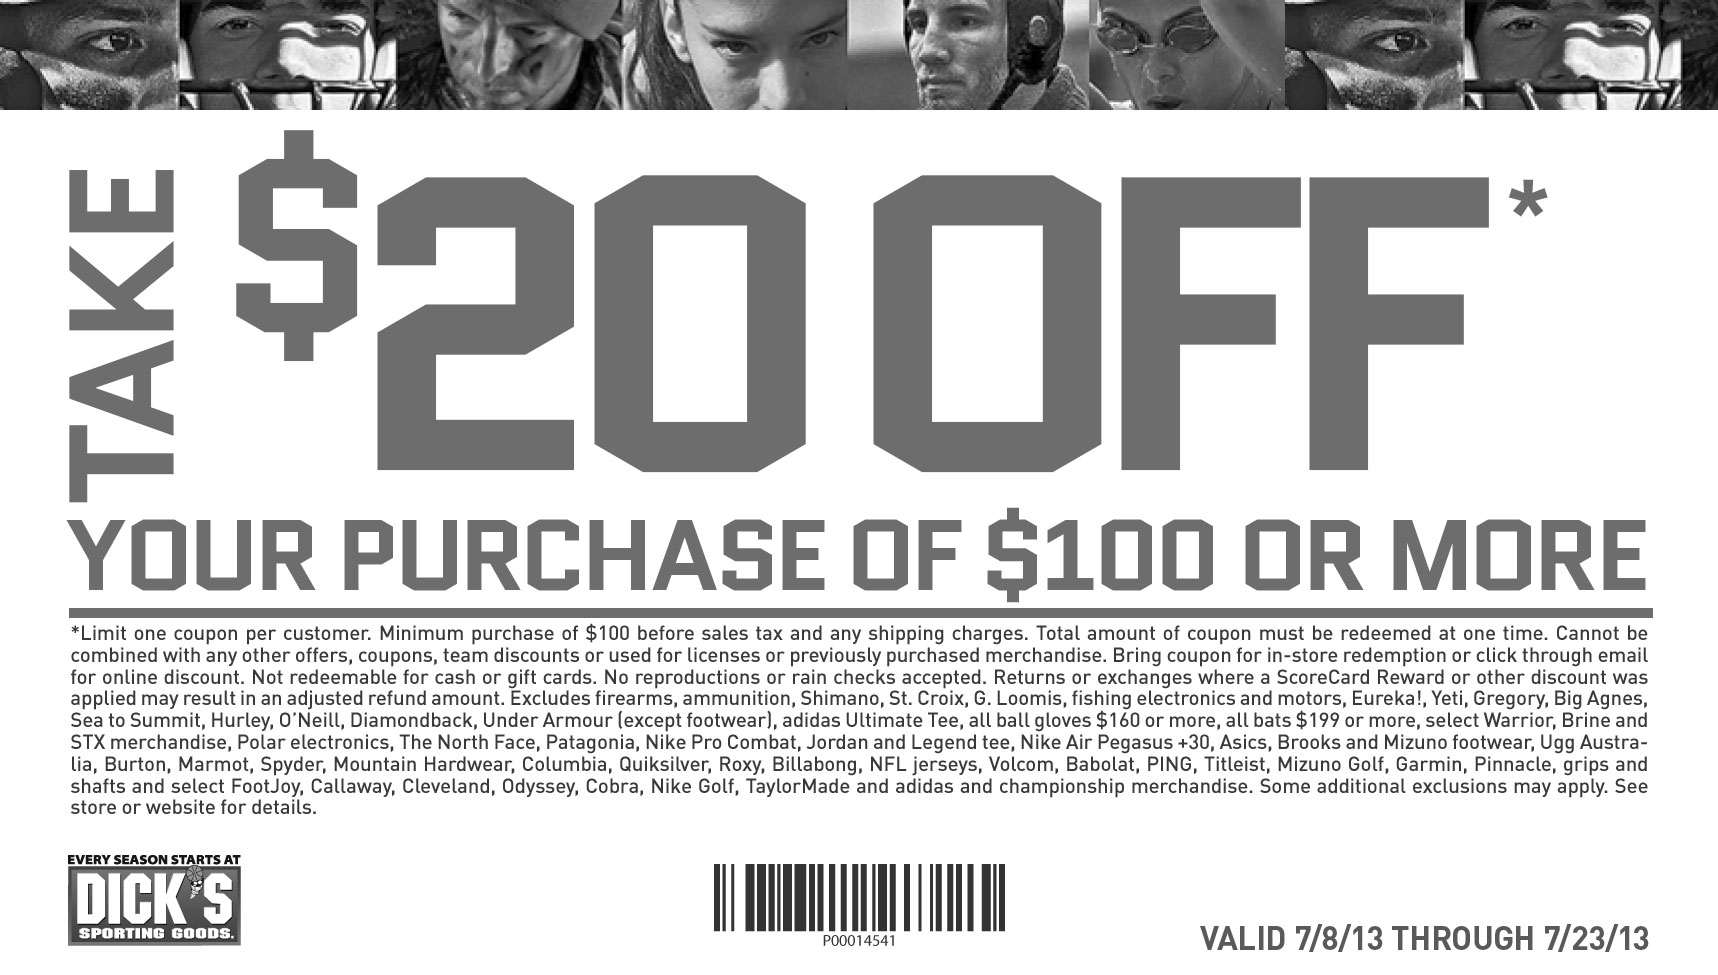 Take $20 off. your purchase of $100 or more. Limit one coupon per customer. 
						Minimum purchase of $100 before sales tax. Online minimum purchase of $100 before taxes and shipping charges.Total amount of coupon must 
						be redeemed at one time. Cannot be combined with any other offers, coupons, team discounts or Guaranteed In-Stock markdown, or used for 
						licenses or previously purchased merchandise. Bring coupon for in-store redemption or click through email for online discount. Online code 
						excludes tax and shipping. Not redeemable for cash, gift cards or store credit. No reproductions or rain checks accepted. Returns or exchanges 
						where a ScoreCard Reward or other discount was applied may result in an adjusted refund amount. Excludes firearms, ammunition, Shimano, 
						St. Croix, G. Loomis, fishing electronics and motors, Eureka!, Yeti, Gregory, Big Agnes, Sea to Summit, Hurley, O’Neill, Diamondback, Under 
						Armour (except footwear), adidas Ultimate Tee, all ball gloves $160 or more, all bats $199 or more, select Warrior, Brine and STX merchandise, 
						Polar electronics, The North Face, Patagonia, Nike Pro Combat, Jordan and Legend tee, Nike Air Pegasus +30, Asics, Brooks and Mizuno footwear, 
						Ugg Australia, Burton, Marmot, Spyder, Mountain Hardwear, Columbia, Quiksilver, Roxy, Billabong, NFL jerseys, Volcom, Babolat, PING, Titleist, 
						Mizuno Golf, Garmin, Pinnacle, grips and shafts and select FootJoy, Callaway, Cleveland, Odyssey, Cobra, Nike Golf, TaylorMade and adidas and 
						championship merchandise. Some additional exclusions may apply. See store or website for details.